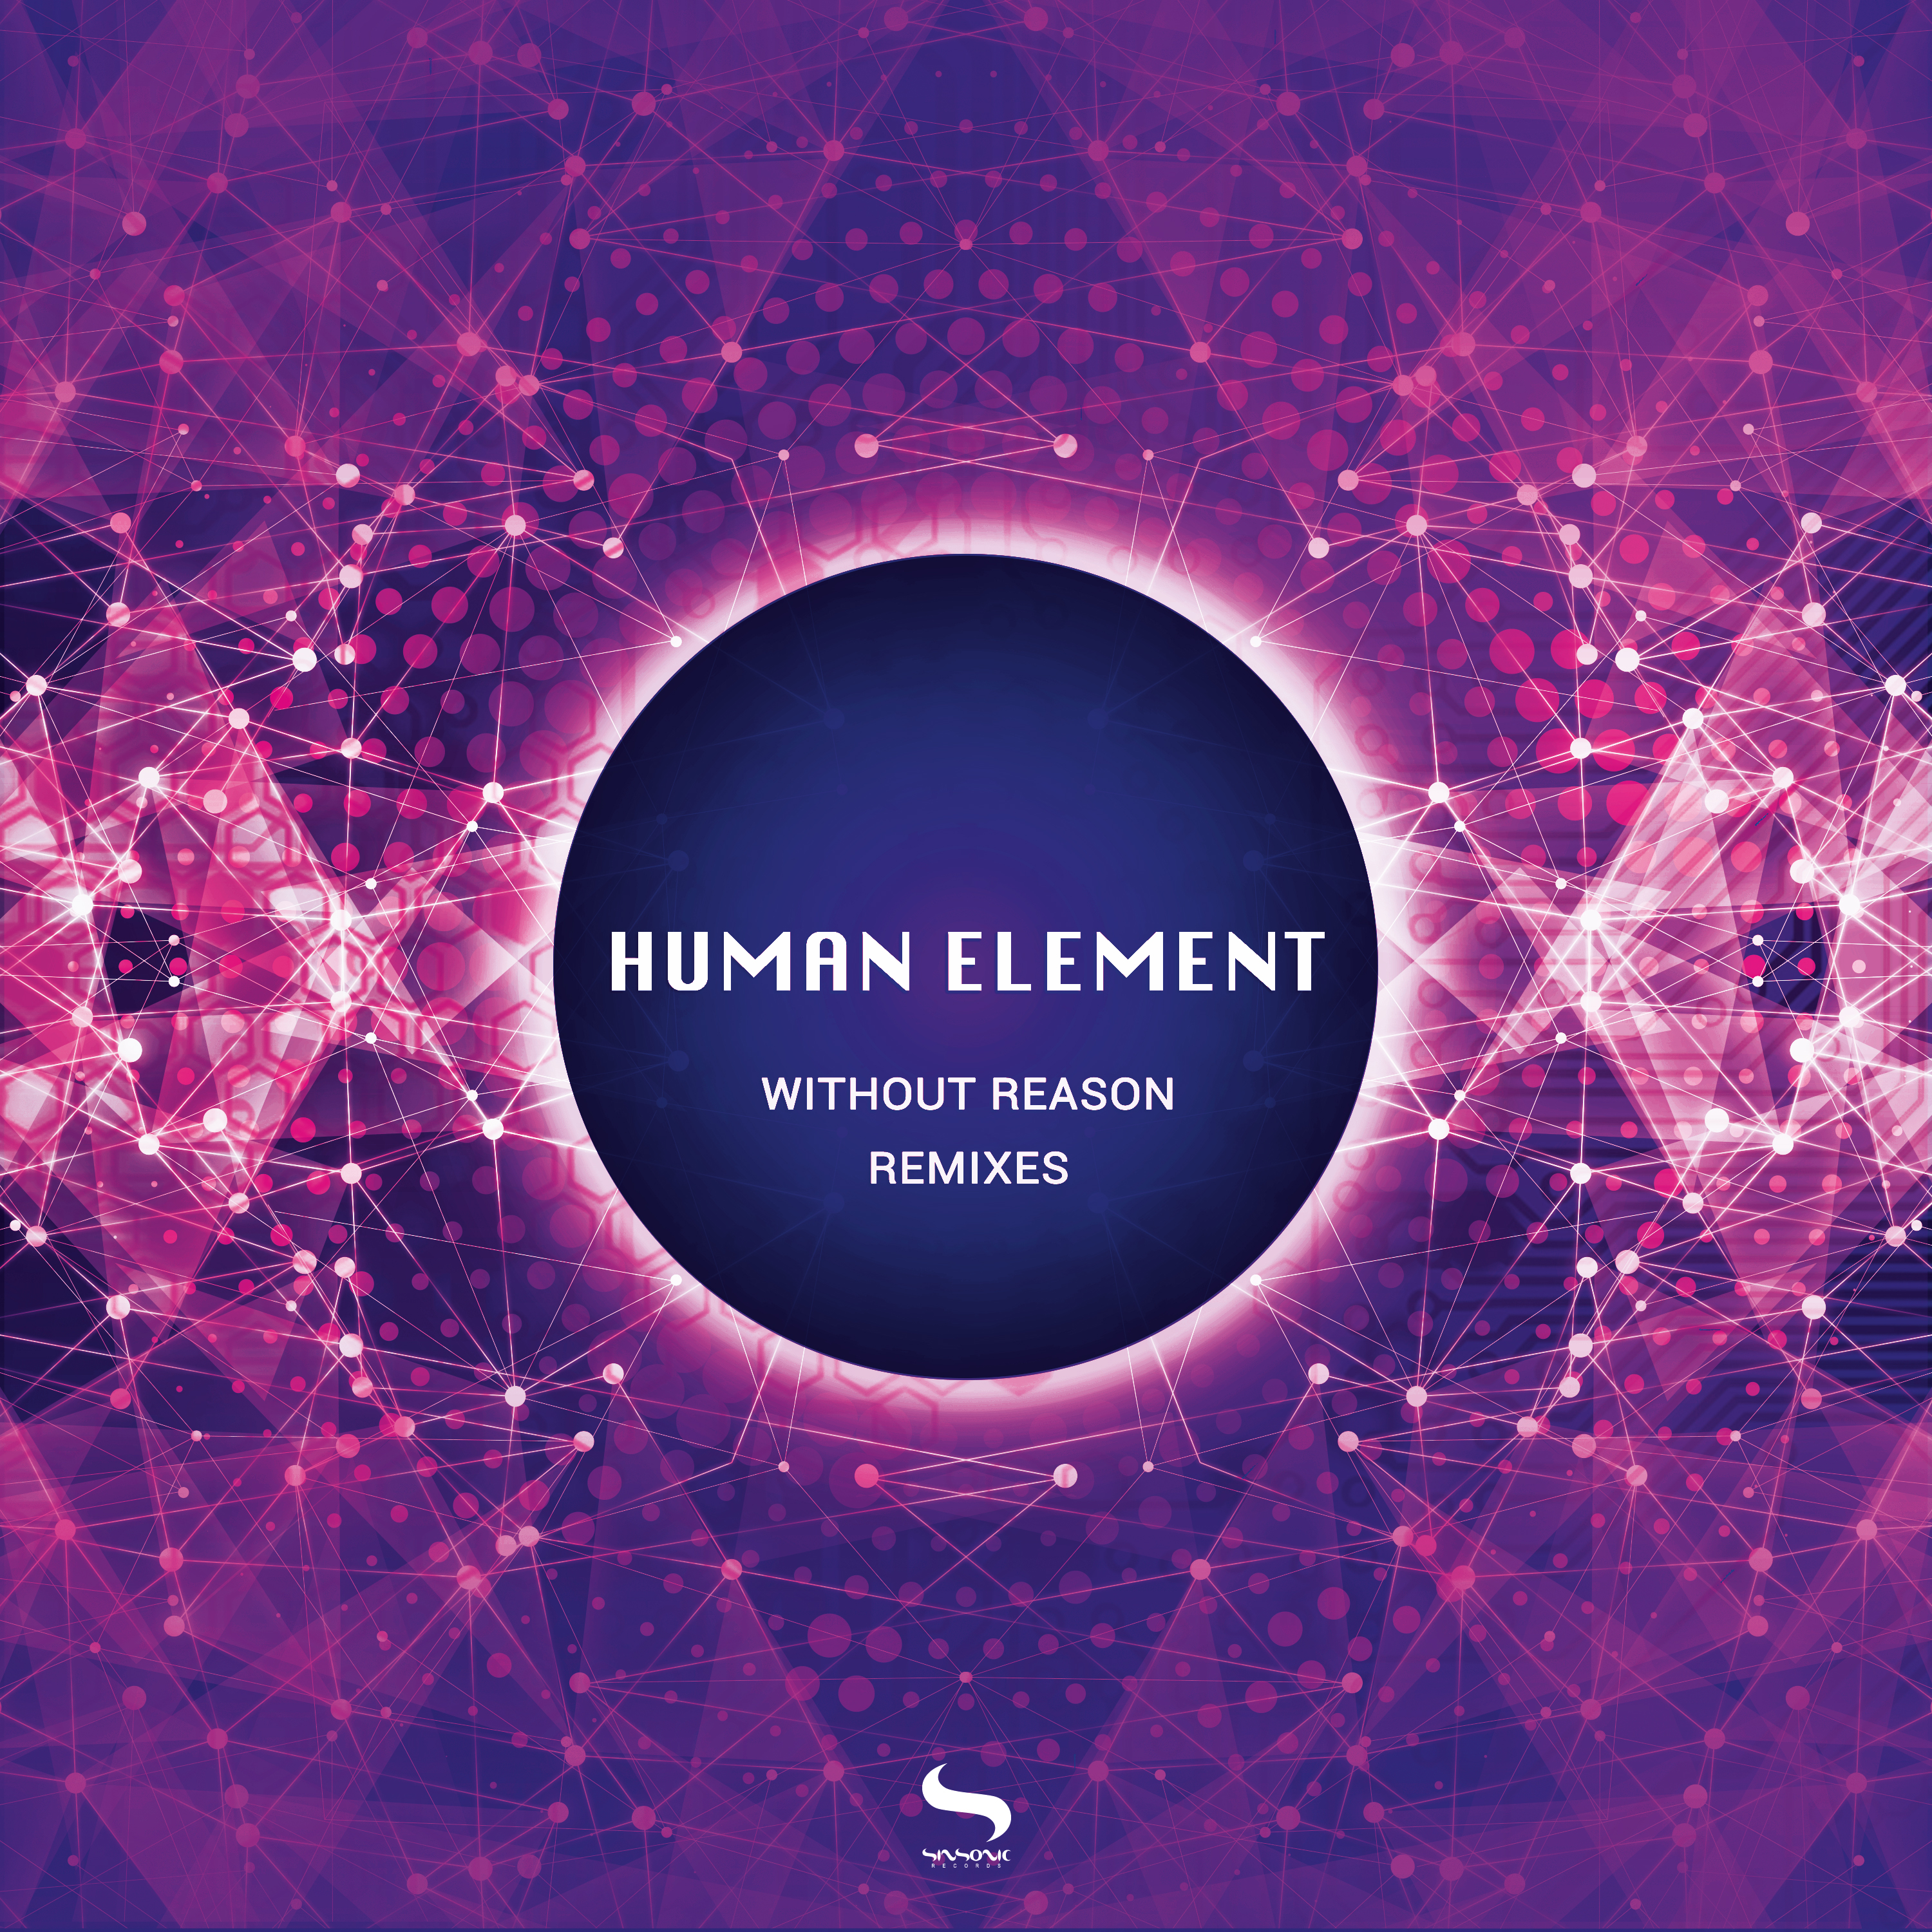 Хуман элемент. Remixes. Without reason. Human elements Lable. Human remix